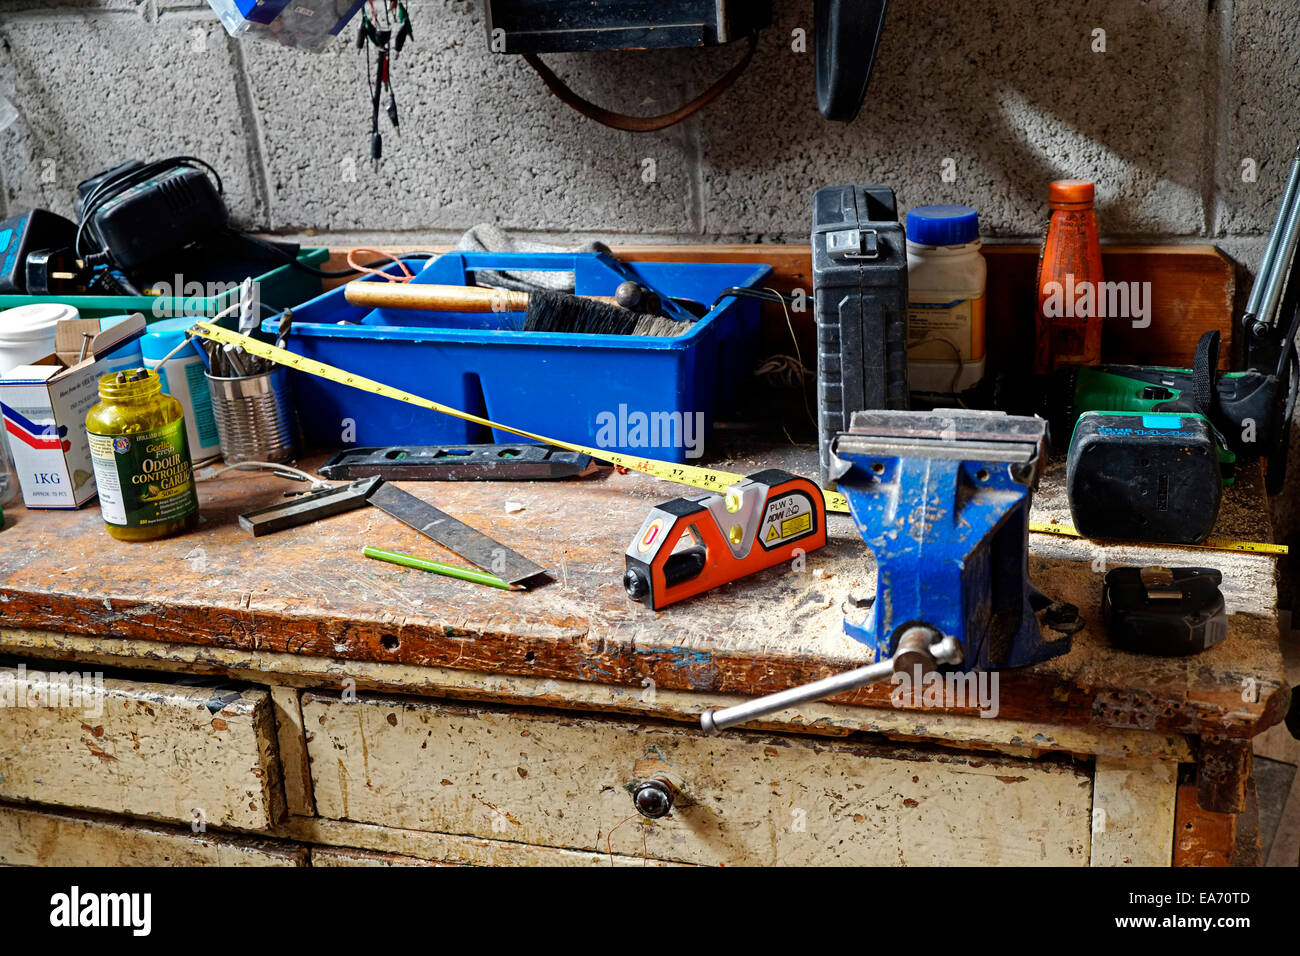 Untidy Workbench with multiple tools and Equipment Stock Photo